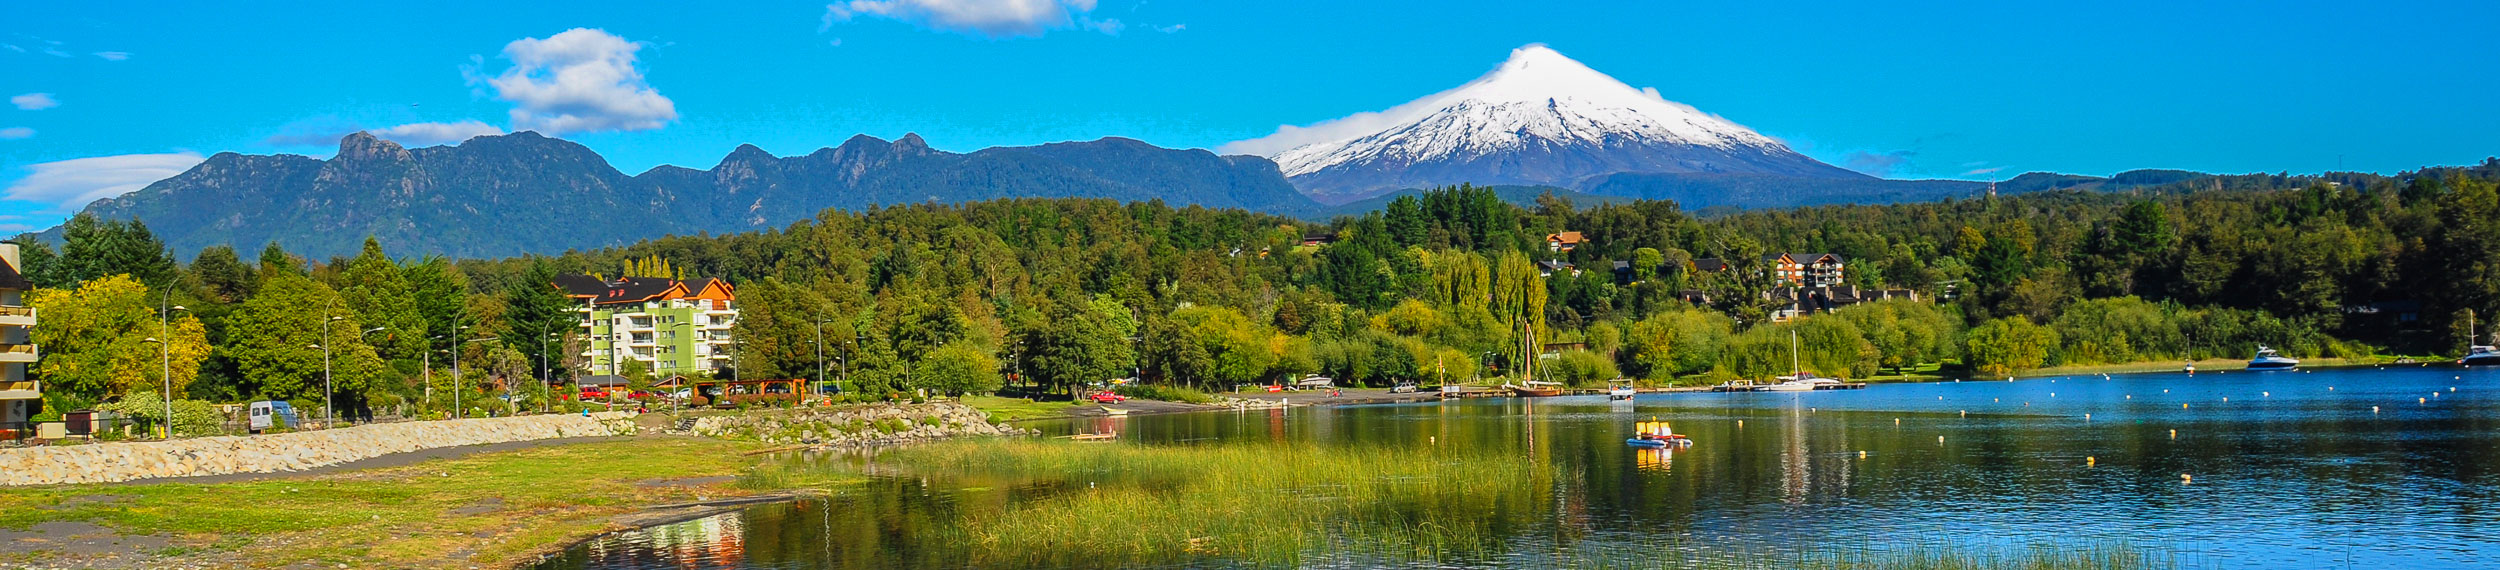 Villarrica Volcano, viewed from Pucon, Chile.